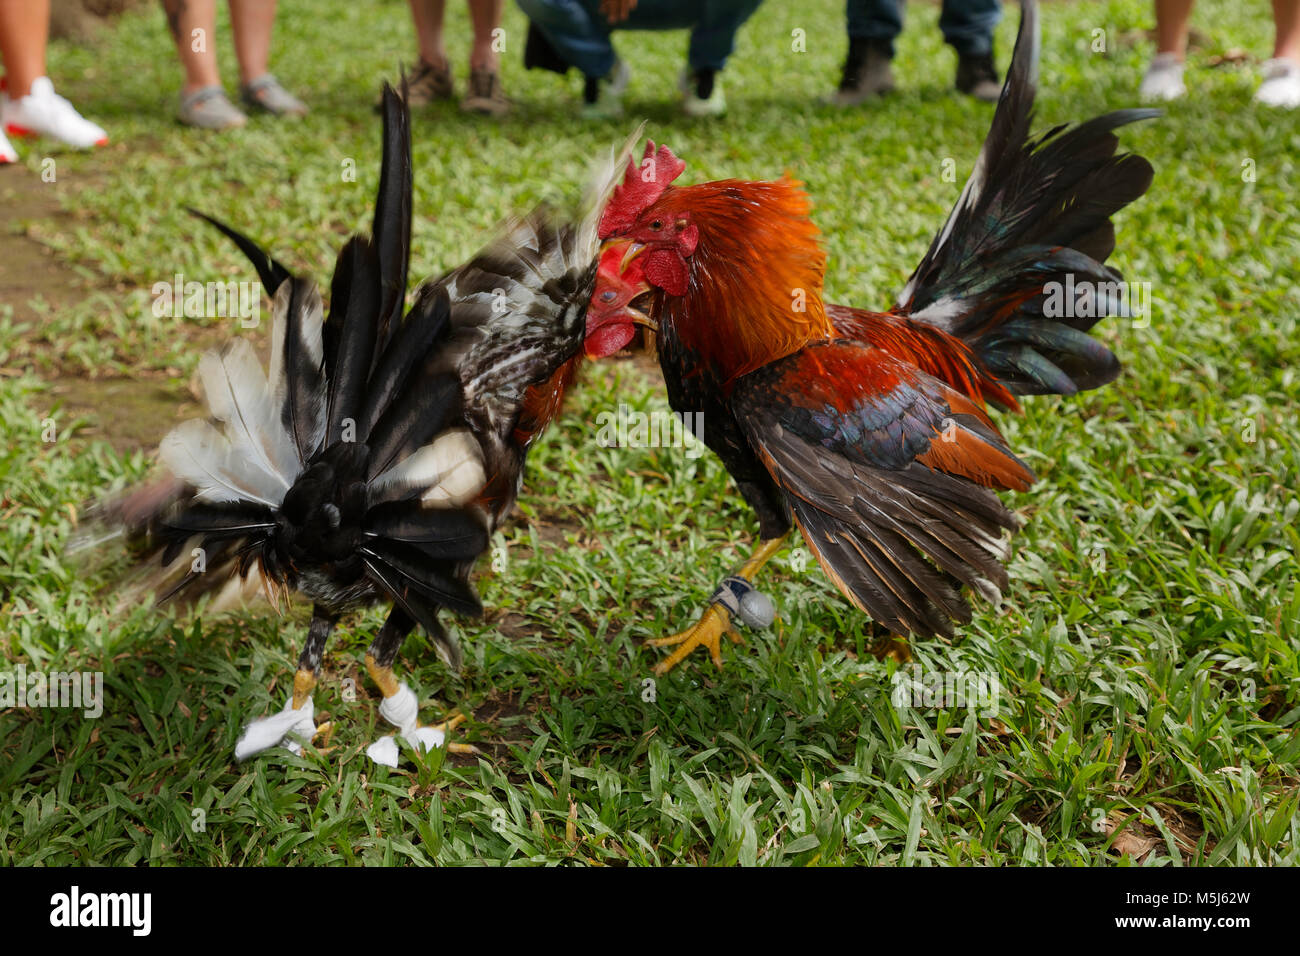 Carribean, Dominican Republic, two fighting gamecocks Stock Photo